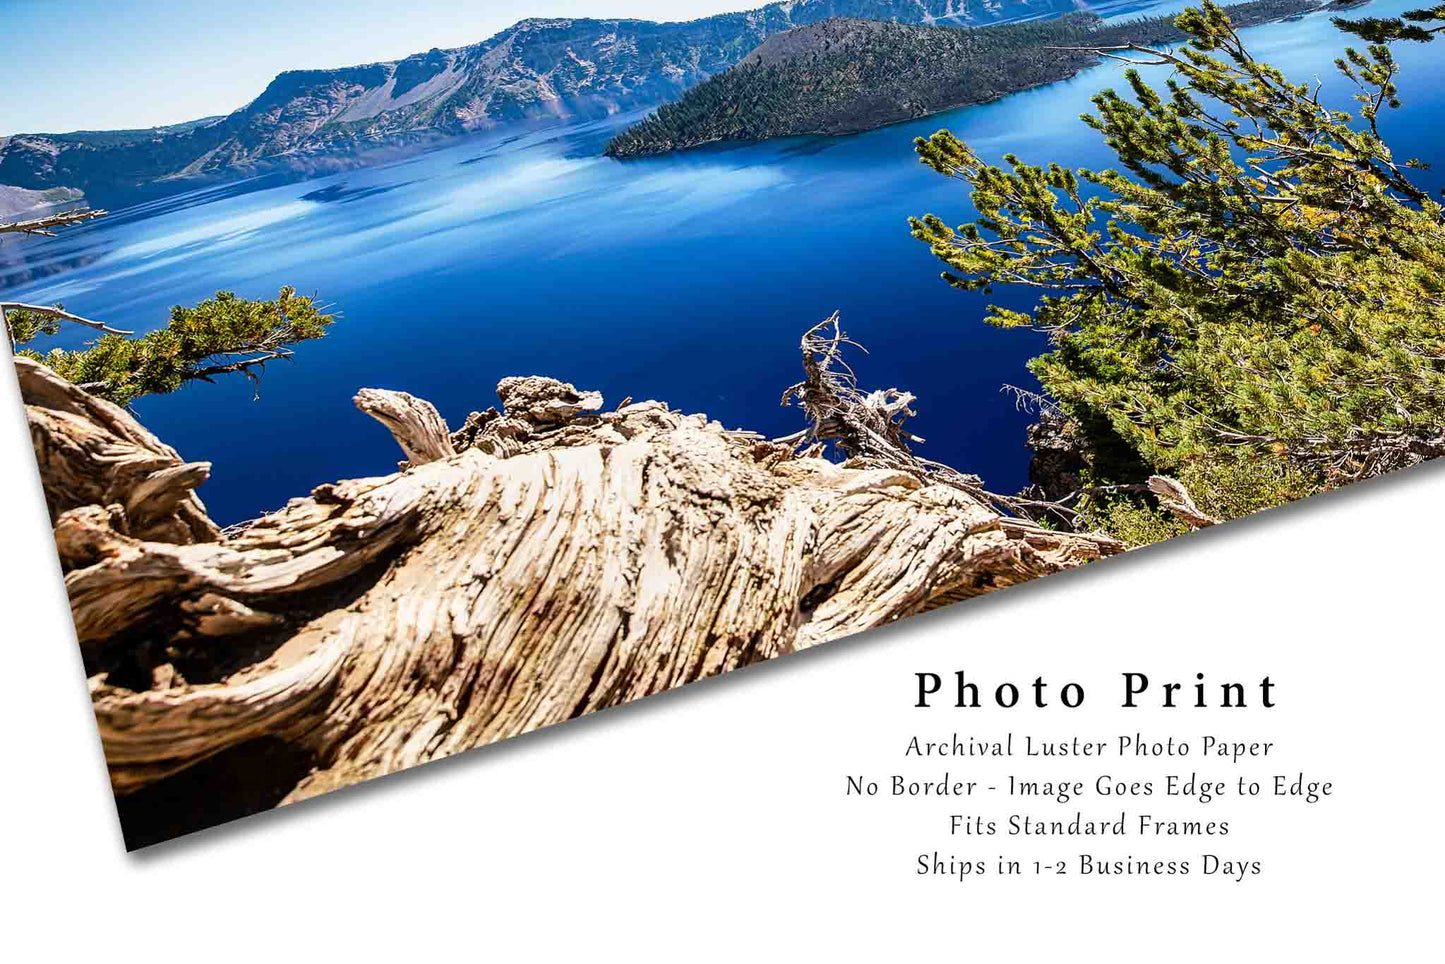 Crater Lake Photography Print | Pacific Northwest Picture | Oregon Wall Art | Wizard Island Photo | Nature Decor | Not Framed